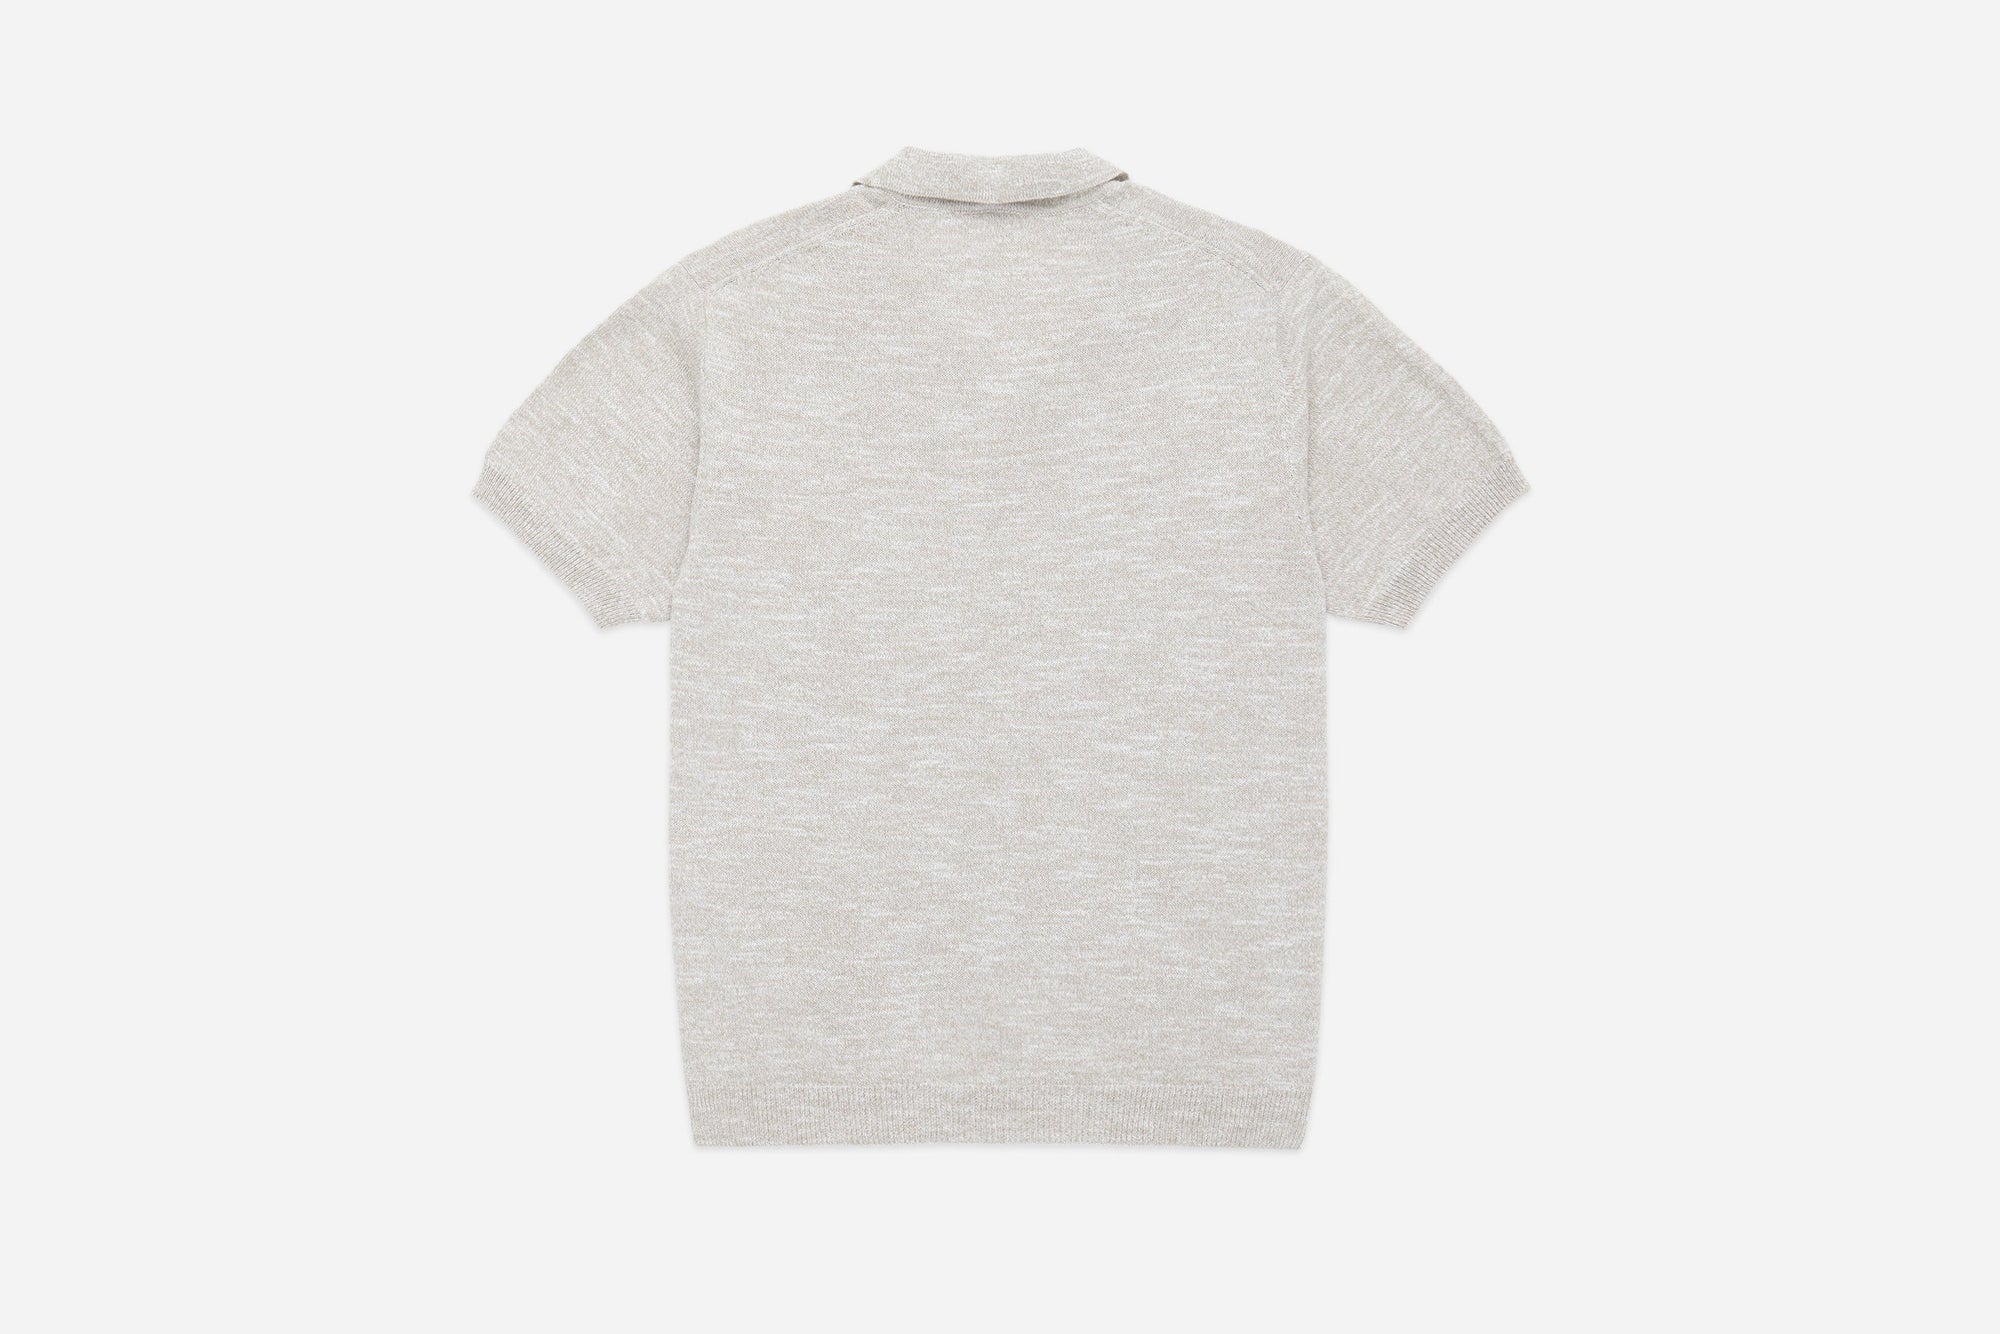 3Sixteen Knit Polo in Natural Marled Yarn